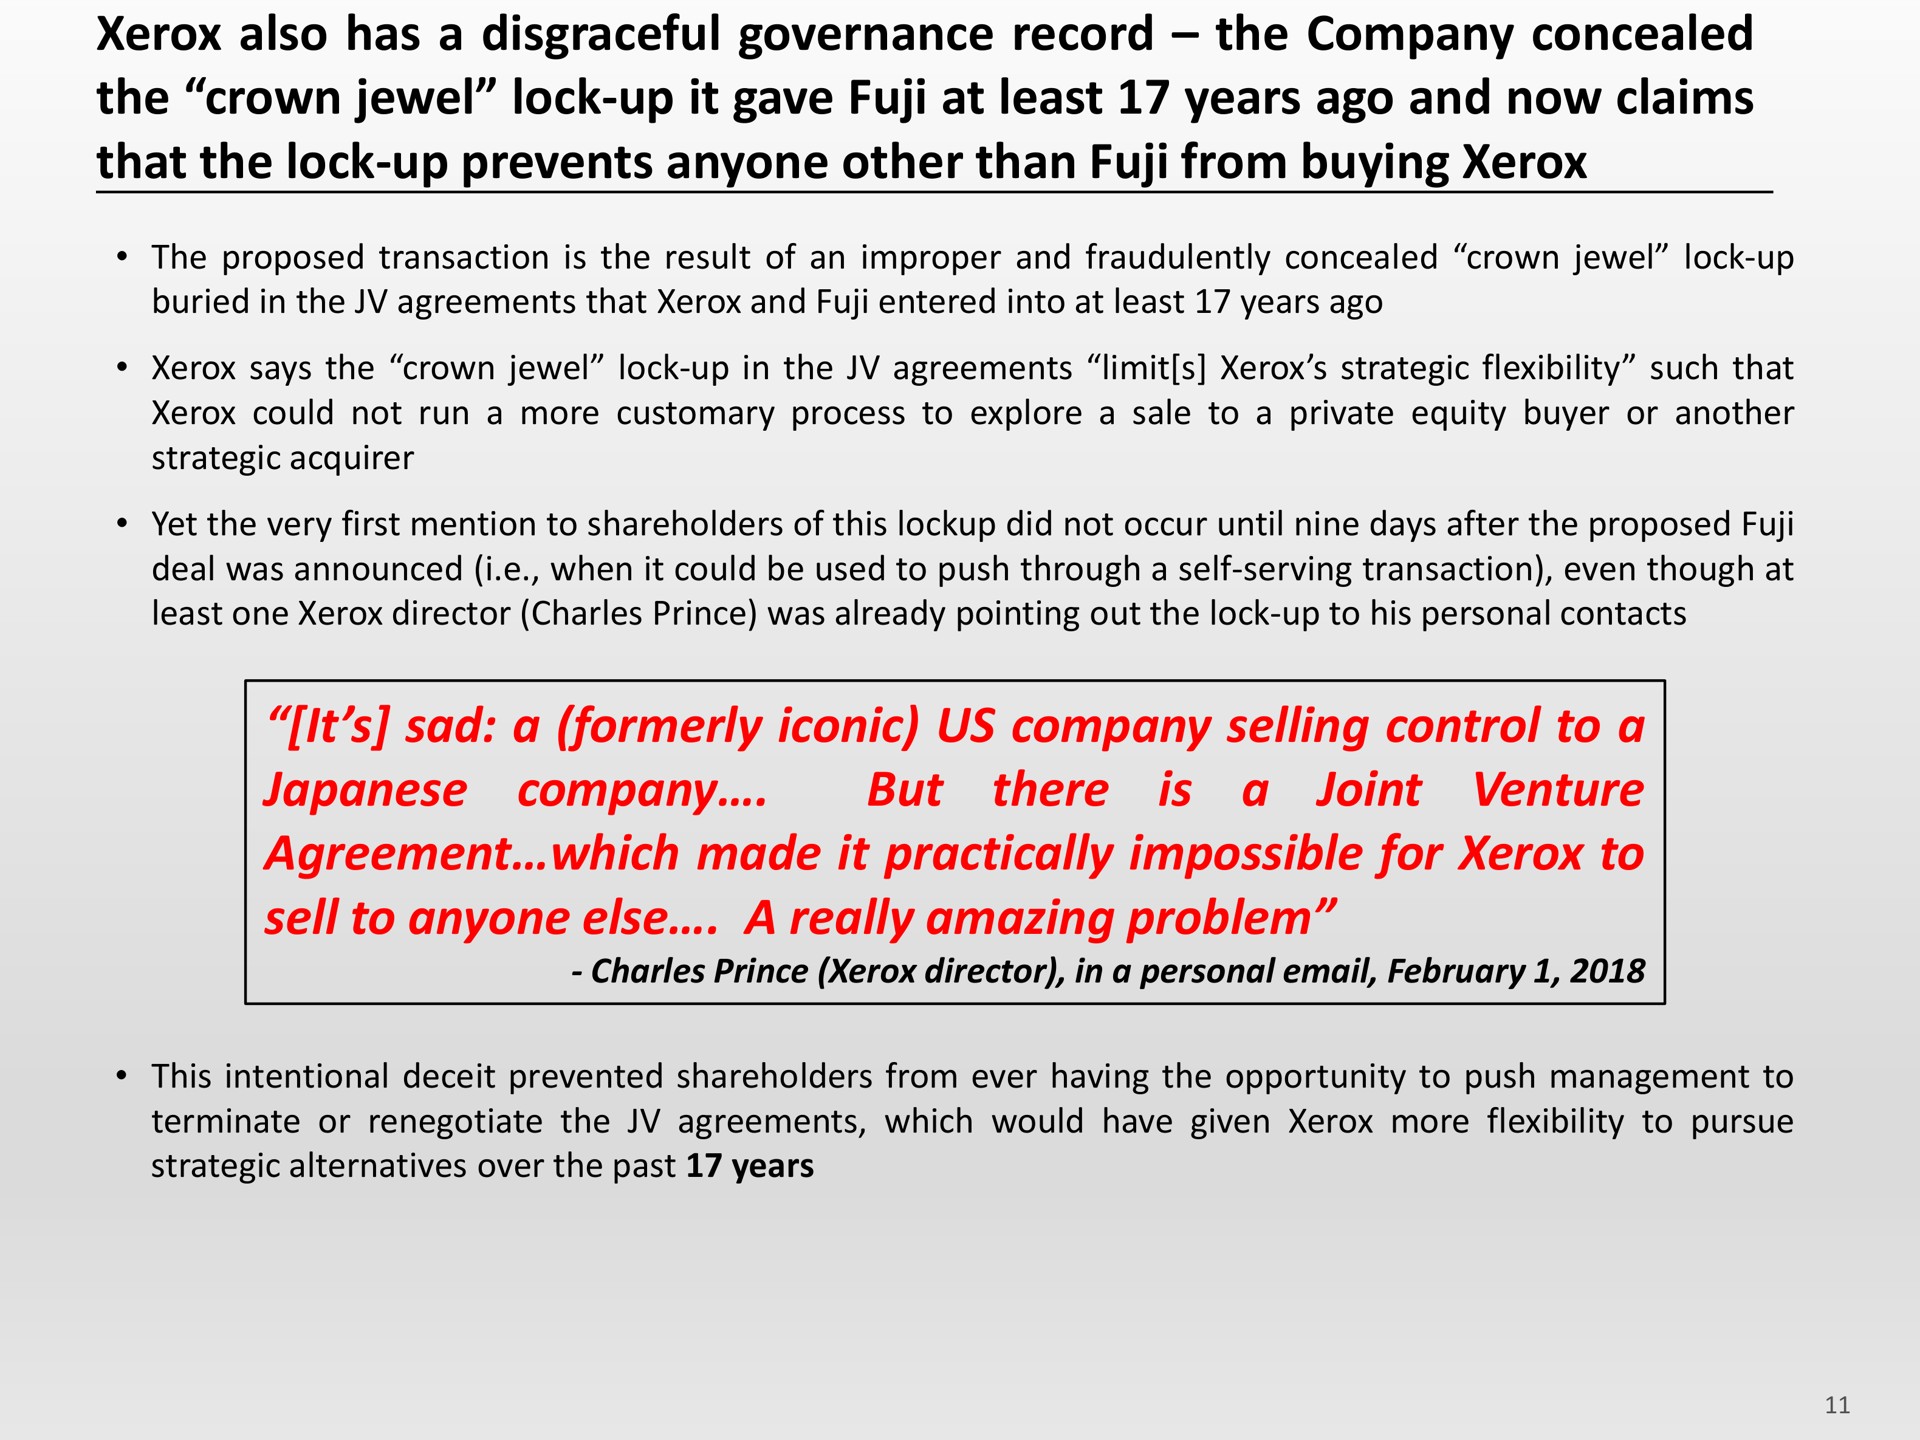 also has a disgraceful governance record the company concealed the crown jewel lock up it gave fuji at least years ago and now claims that the lock up prevents anyone other than fuji from buying it sad a formerly iconic us company selling control to a company joint venture but there agreement which made it practically impossible for to sell to anyone else a really amazing problem is a | Icahn Enterprises